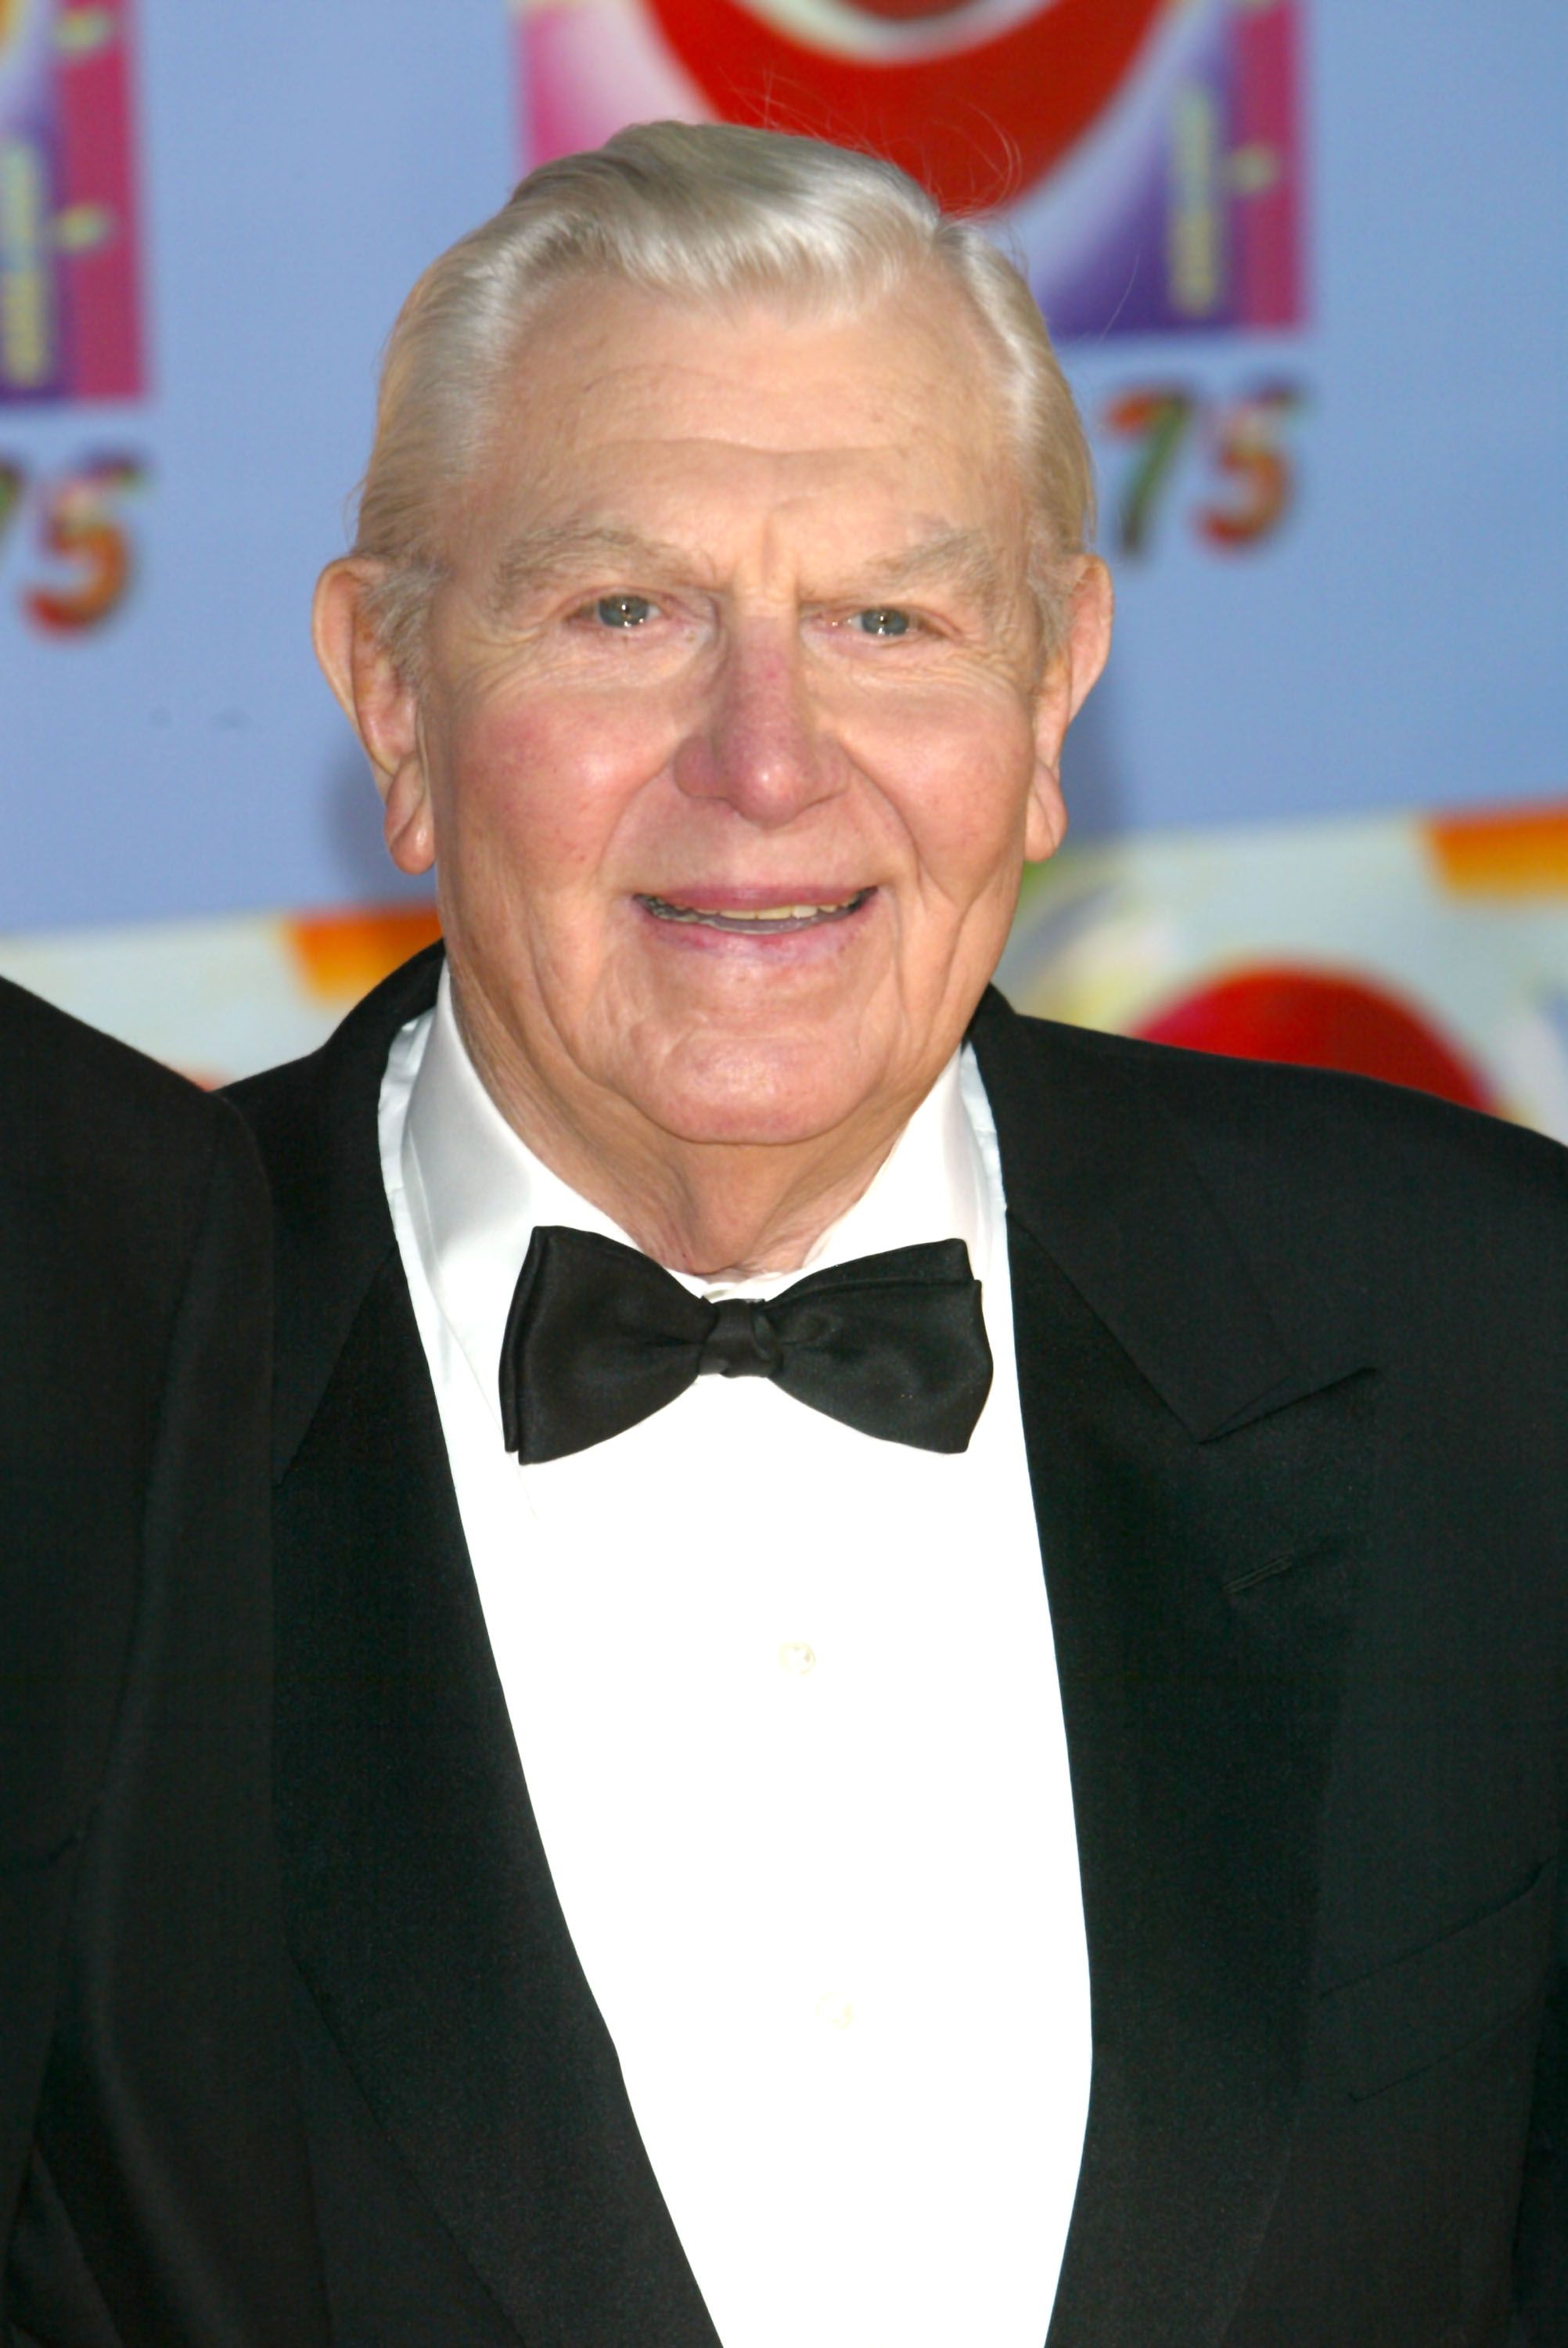 Andy Griffith at the "CBS At 75" celebration on November 2, 2003, in New York City | Photo: Matthew Peyton/Getty Images